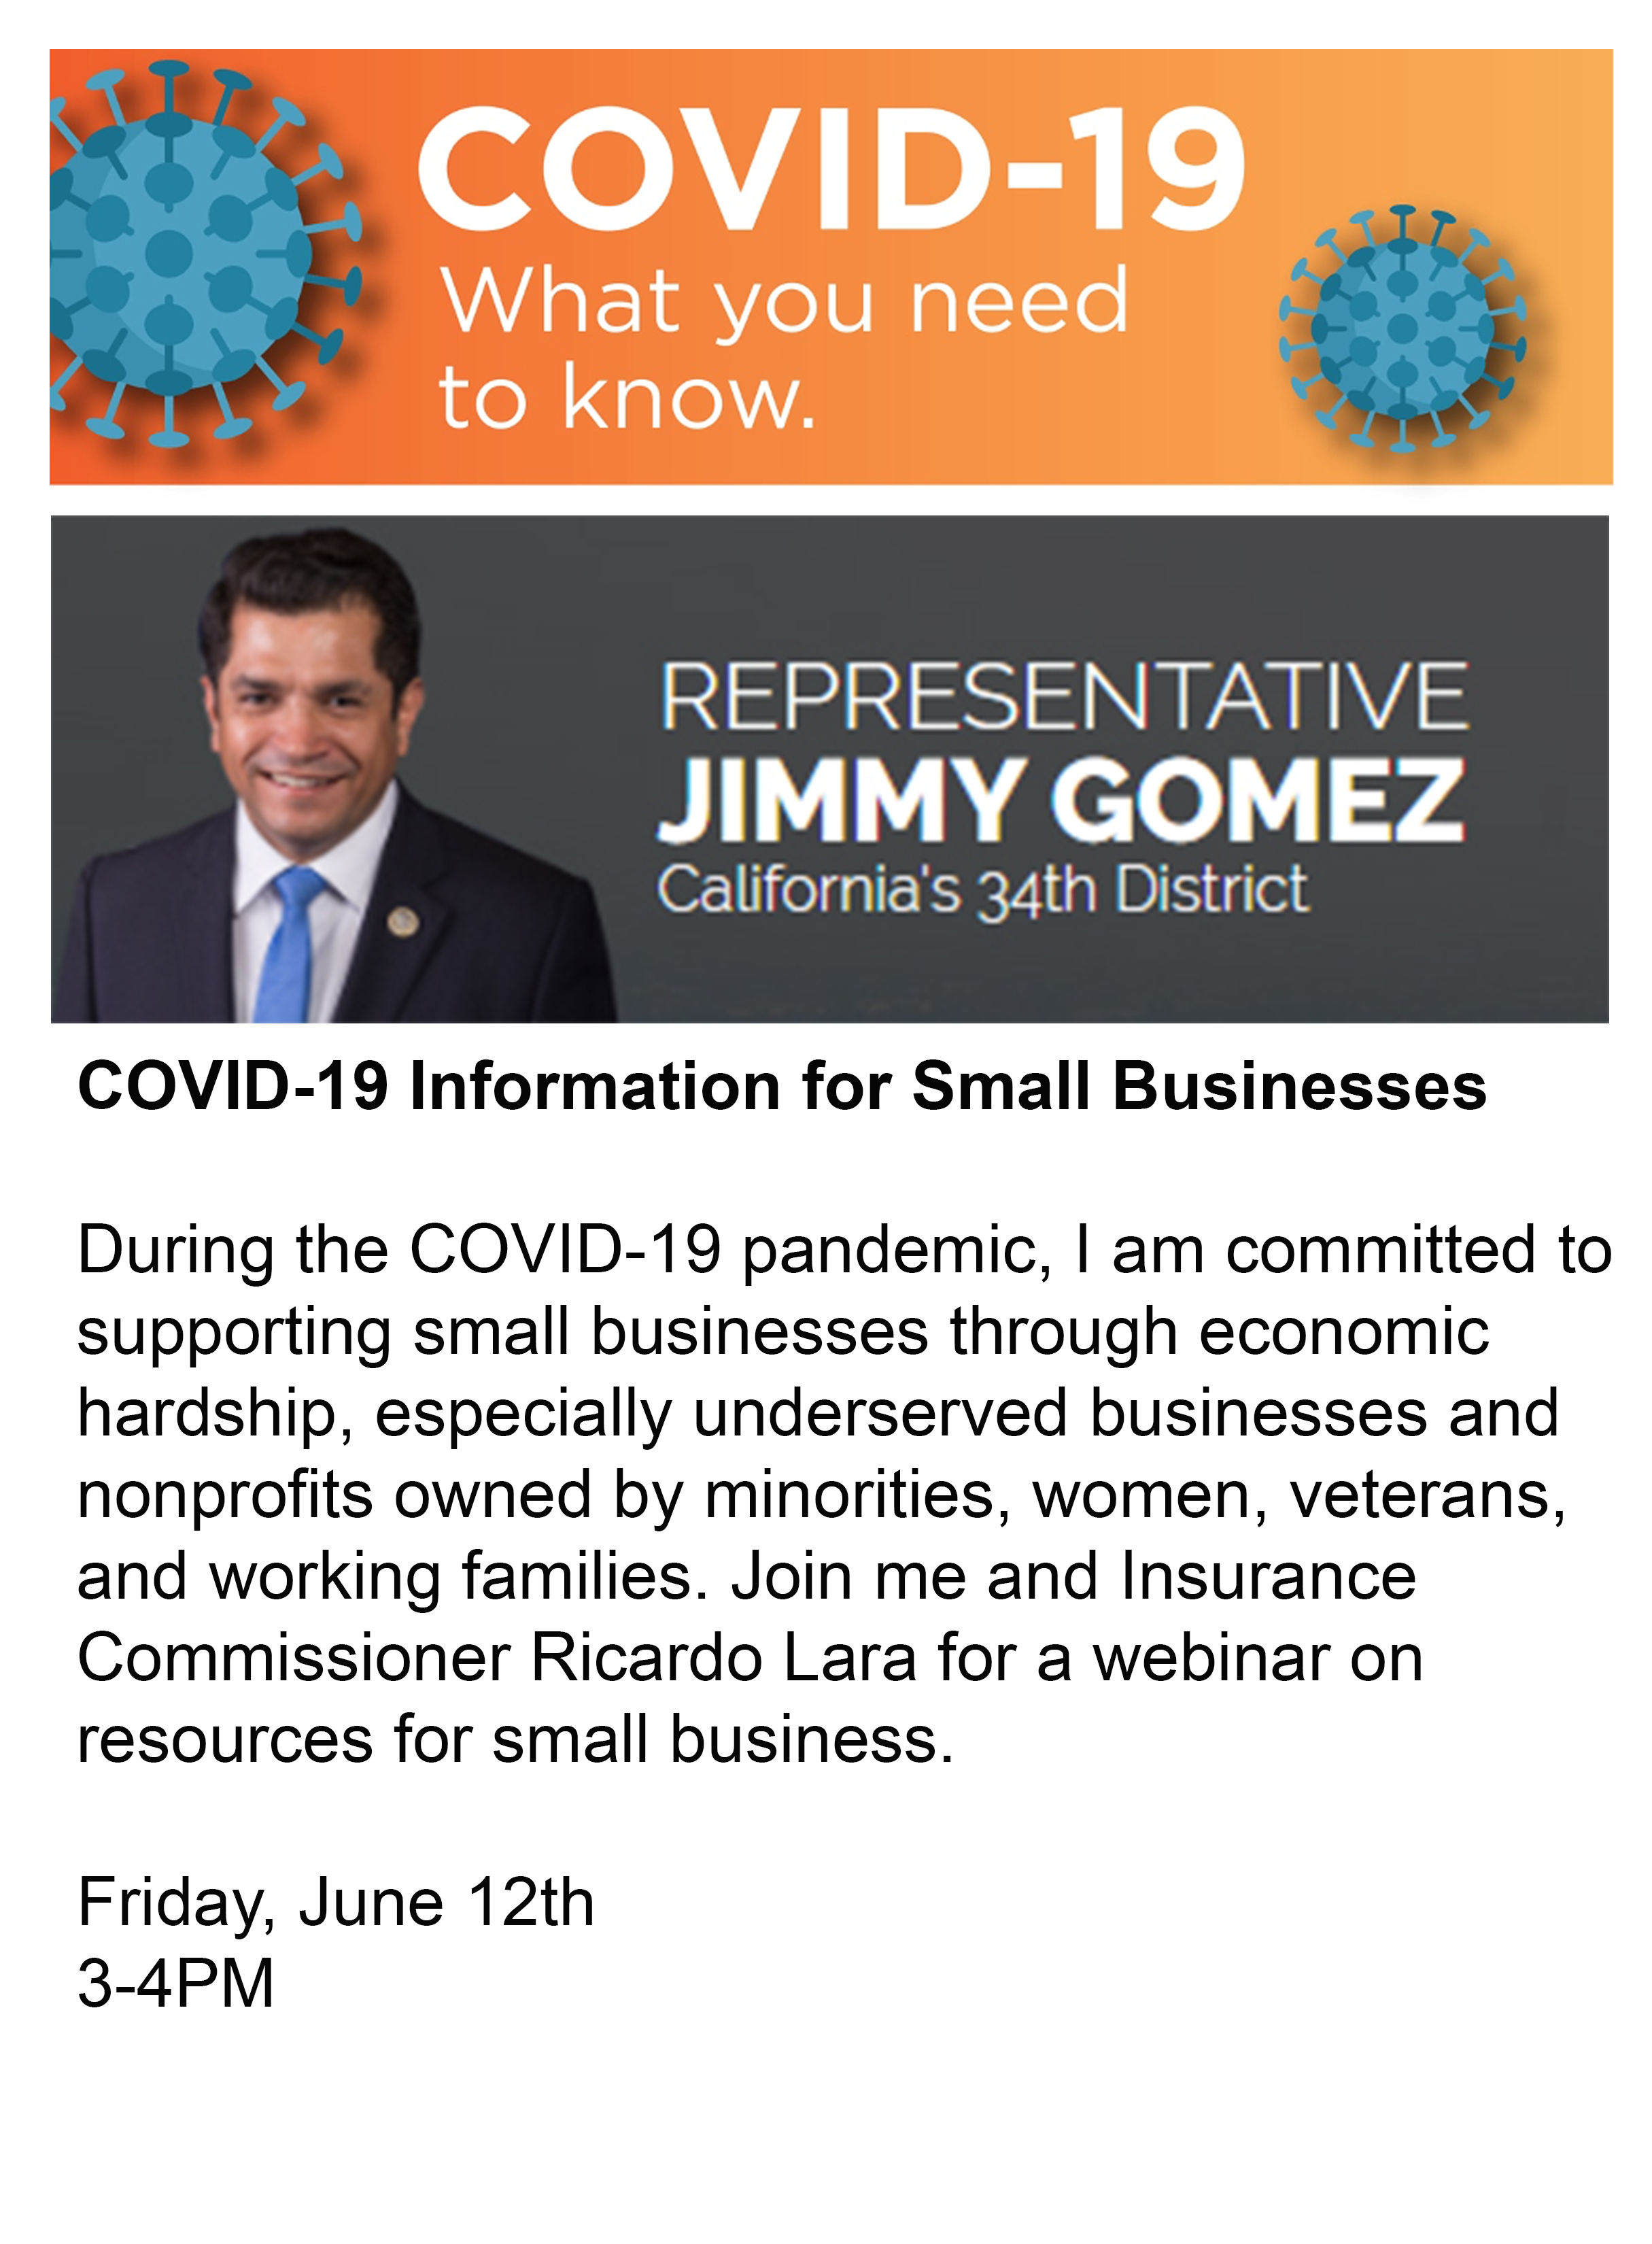 During the COVID-19 pandemic, I am committed to supporting small businesses through economic hardship, especially underserved businesses and nonprofits owned by minorities, women, veterans, and working families. Join me and Insurance Commissioner Ricardo 